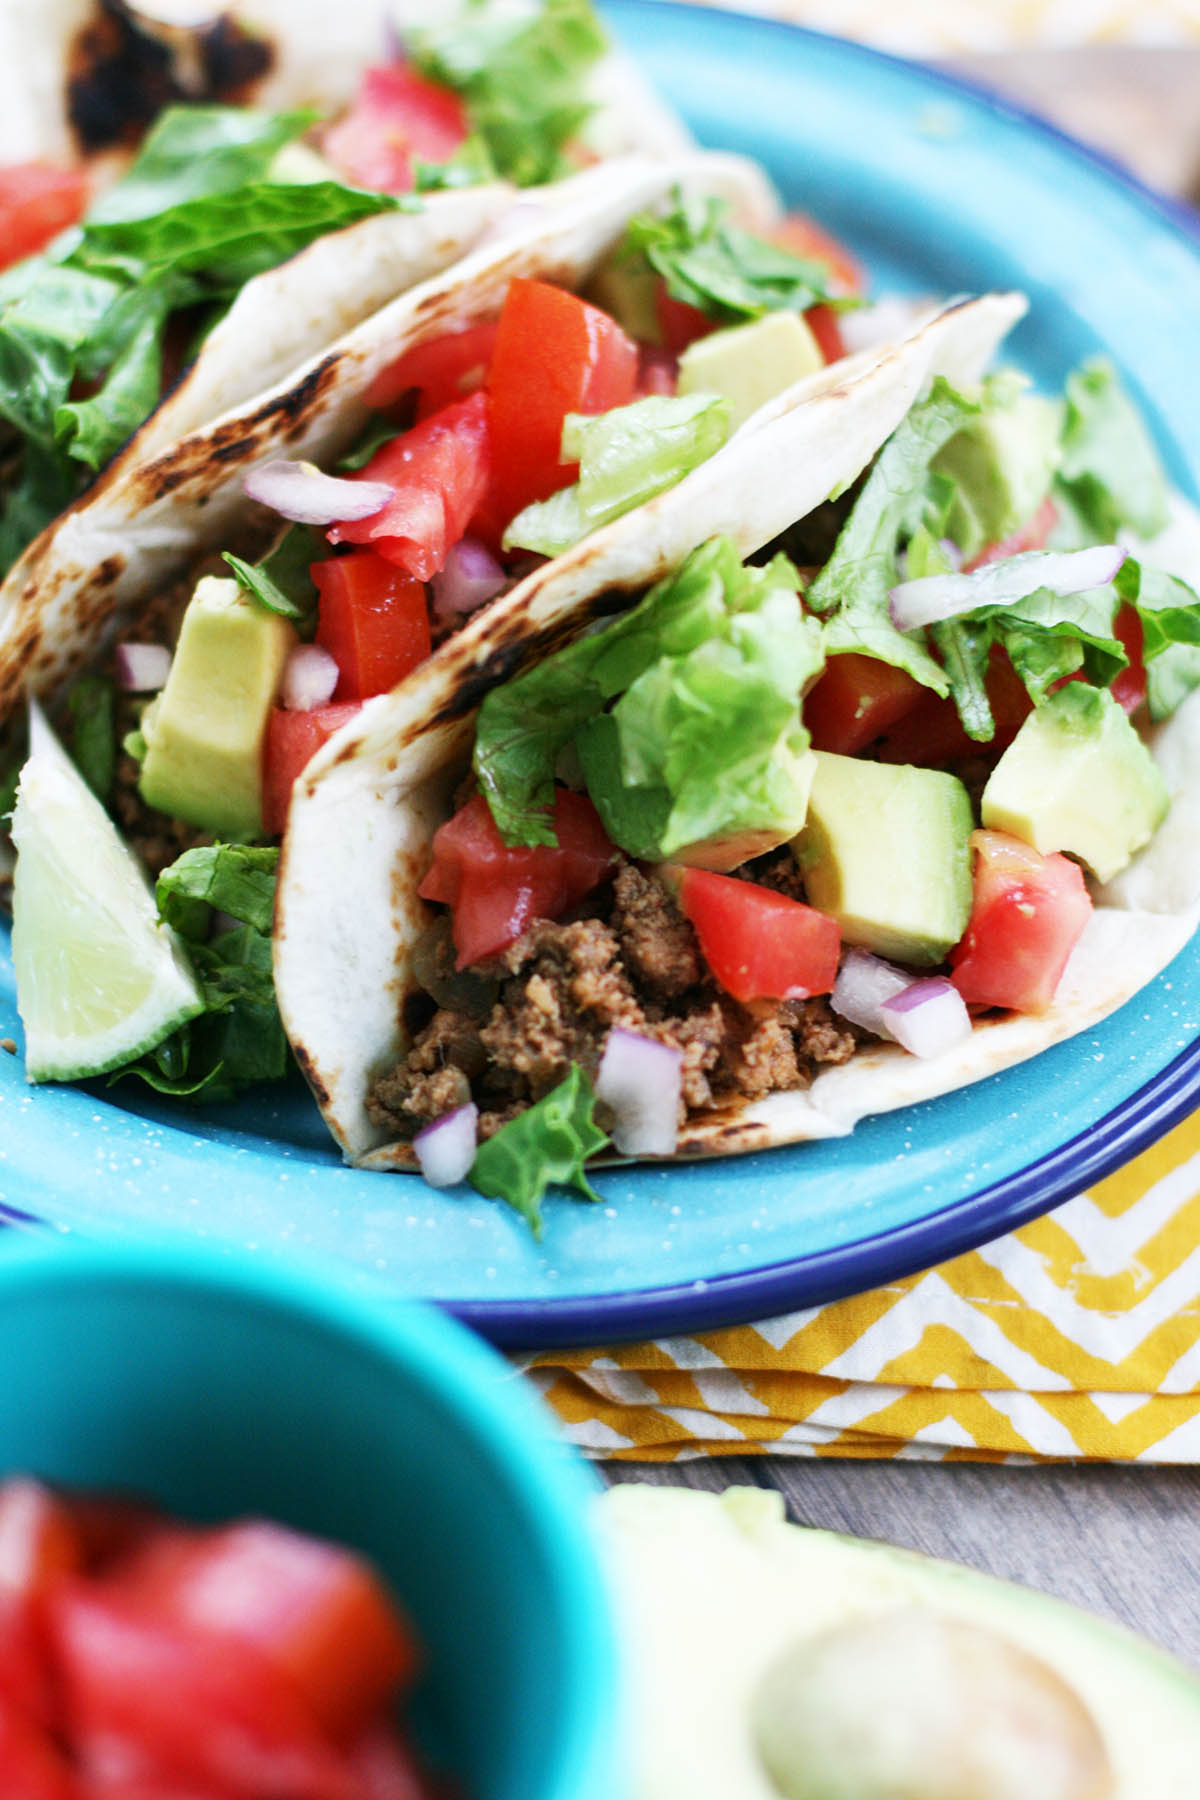 Ground turkey tacos: Mexican-spiced ground turkey makes an affordable taco base. Don't forget to pile on the toppings!